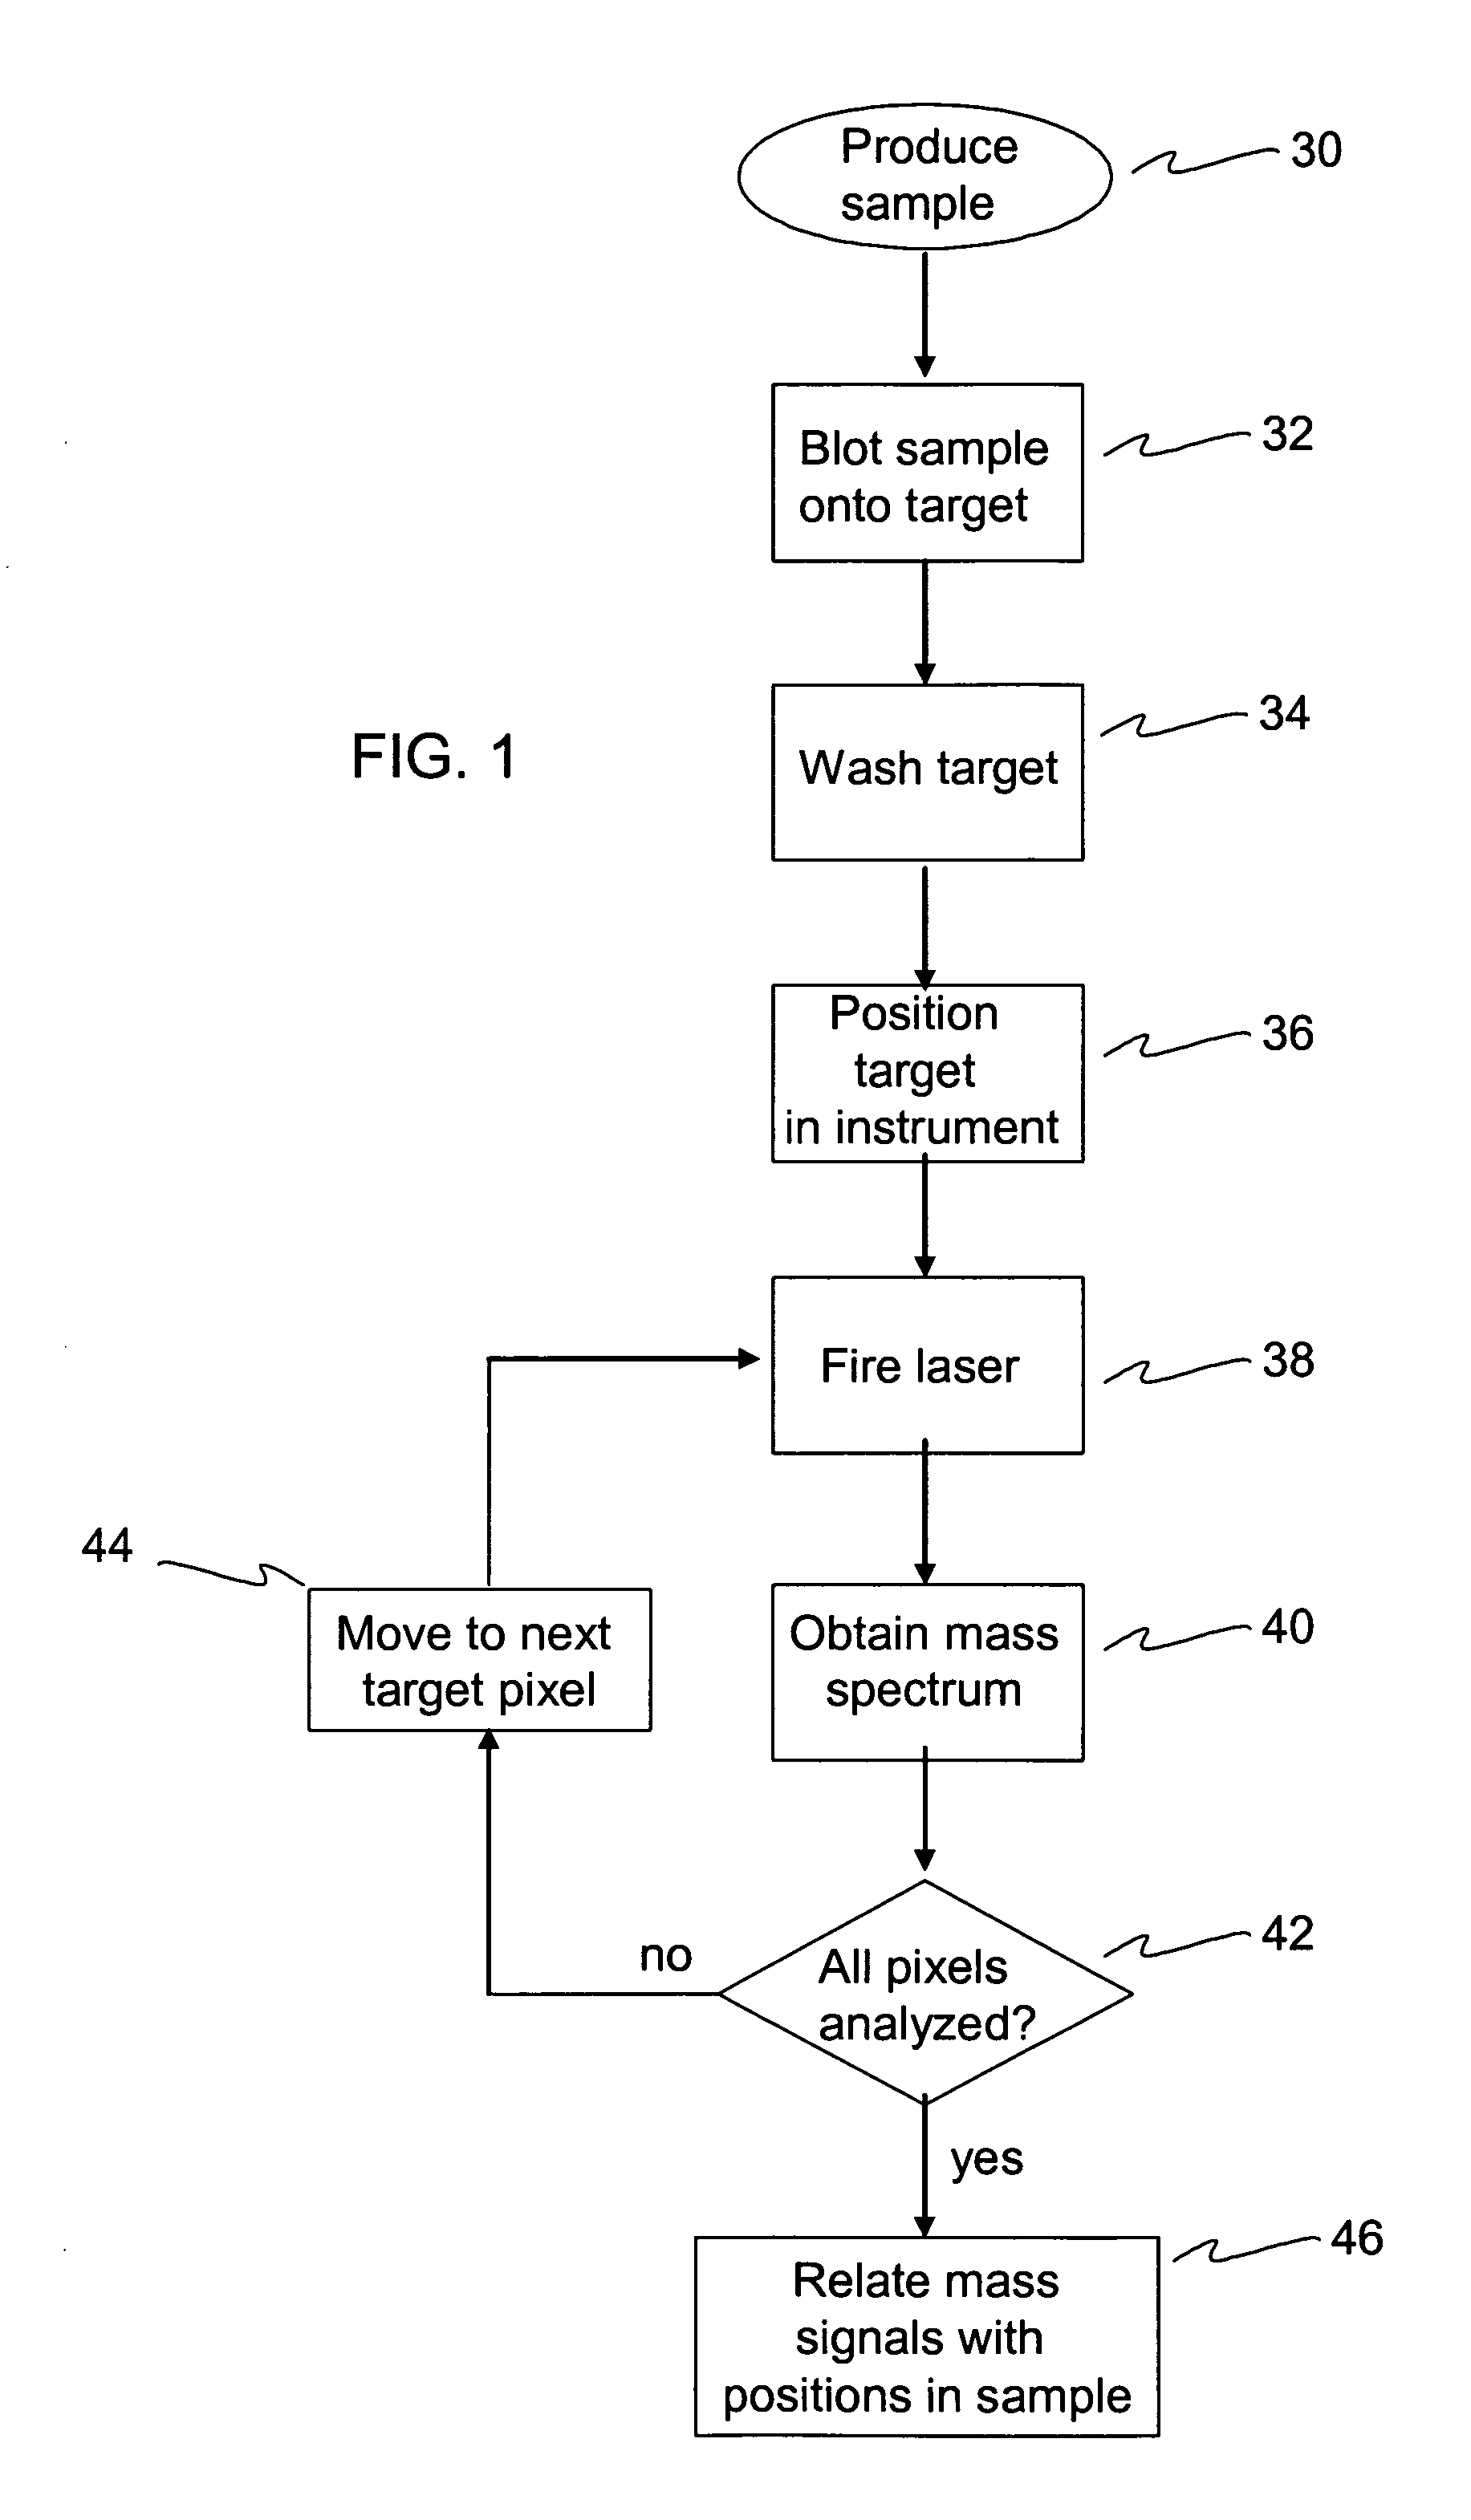 Means and method for analyzing samples by mass spectrometry